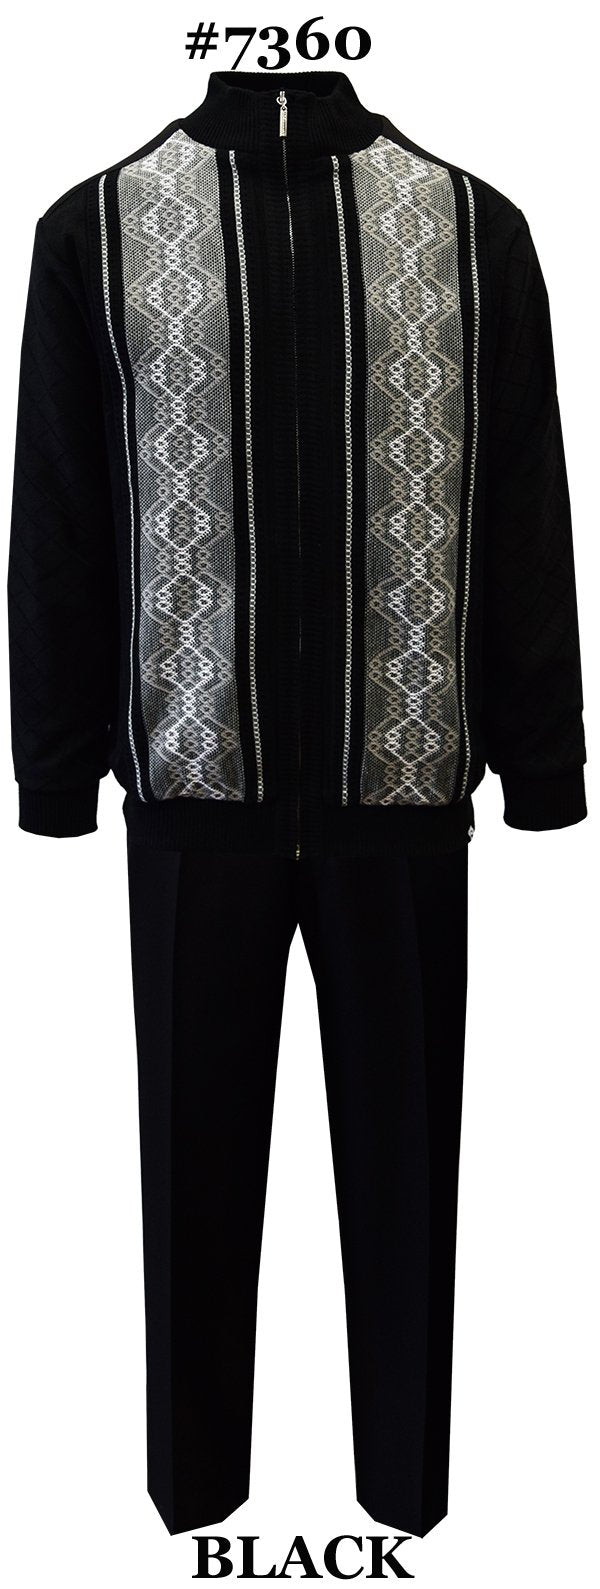 Silver Silk Men's Leisure Suit 2 Pieces With Zip Front Sweater And Matching Pants  Color - Black And White Sizes X-Large To 3X-Large